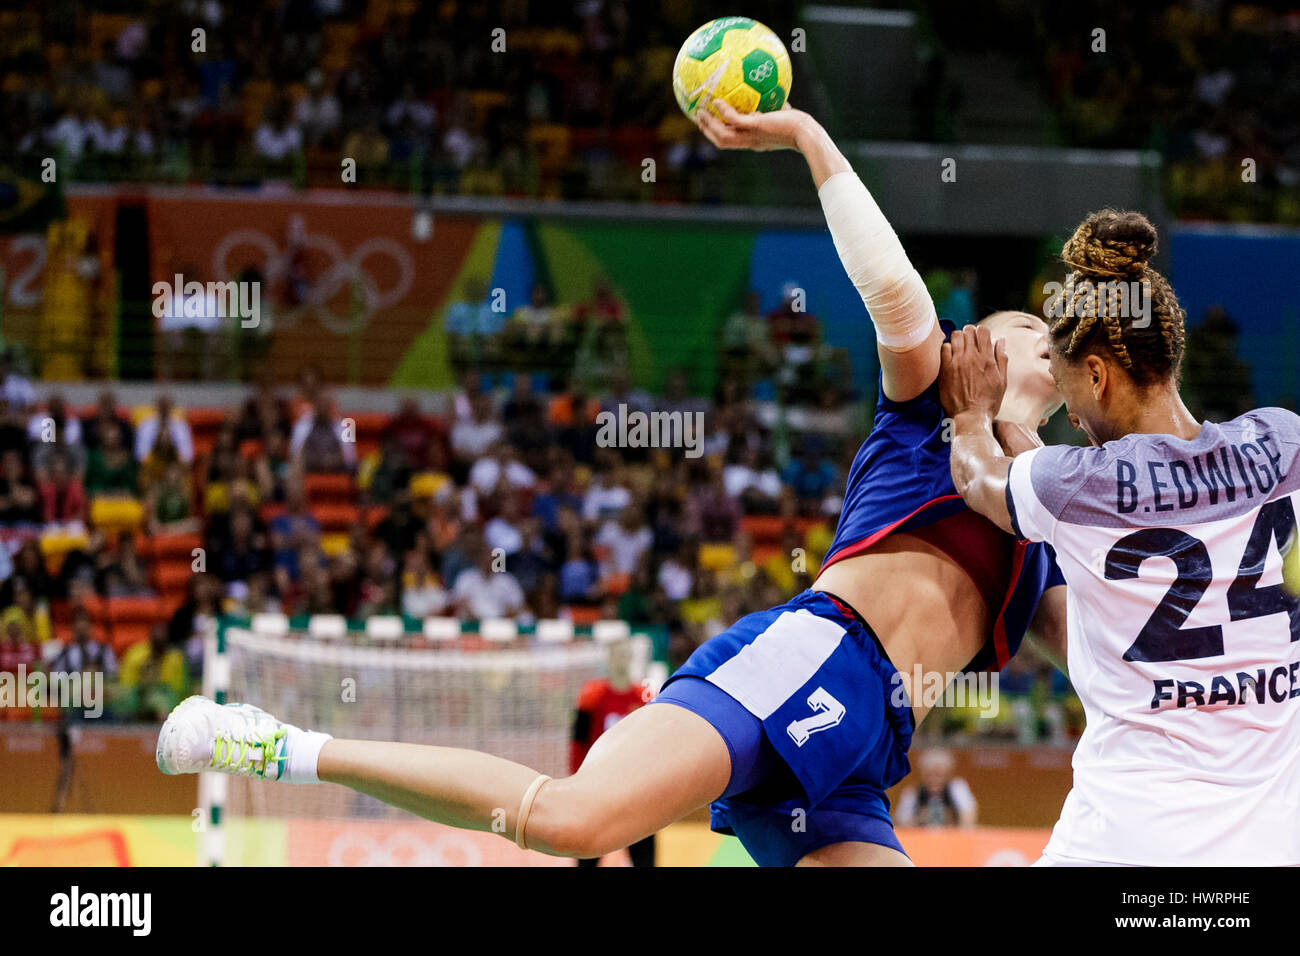 Rio de Janeiro, Brazil. 20 August 2016  Daria Dmitrieva (RUS) #7 defended by Béatrice Edwige (FRA) #24 in the women's handball gold medal match Russia Stock Photo